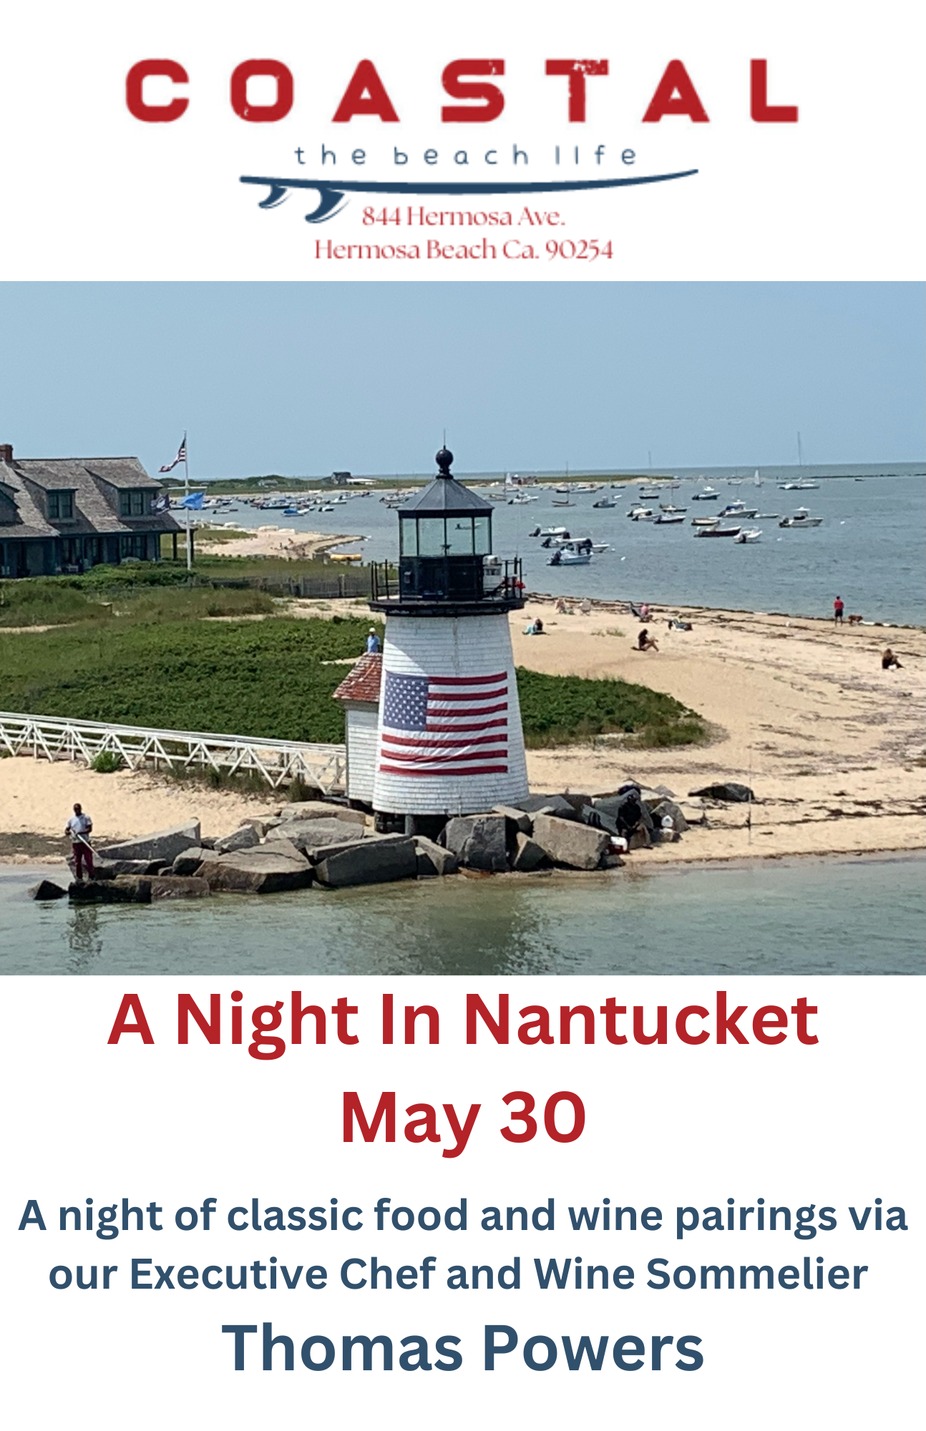 A Night In Nantucket event photo